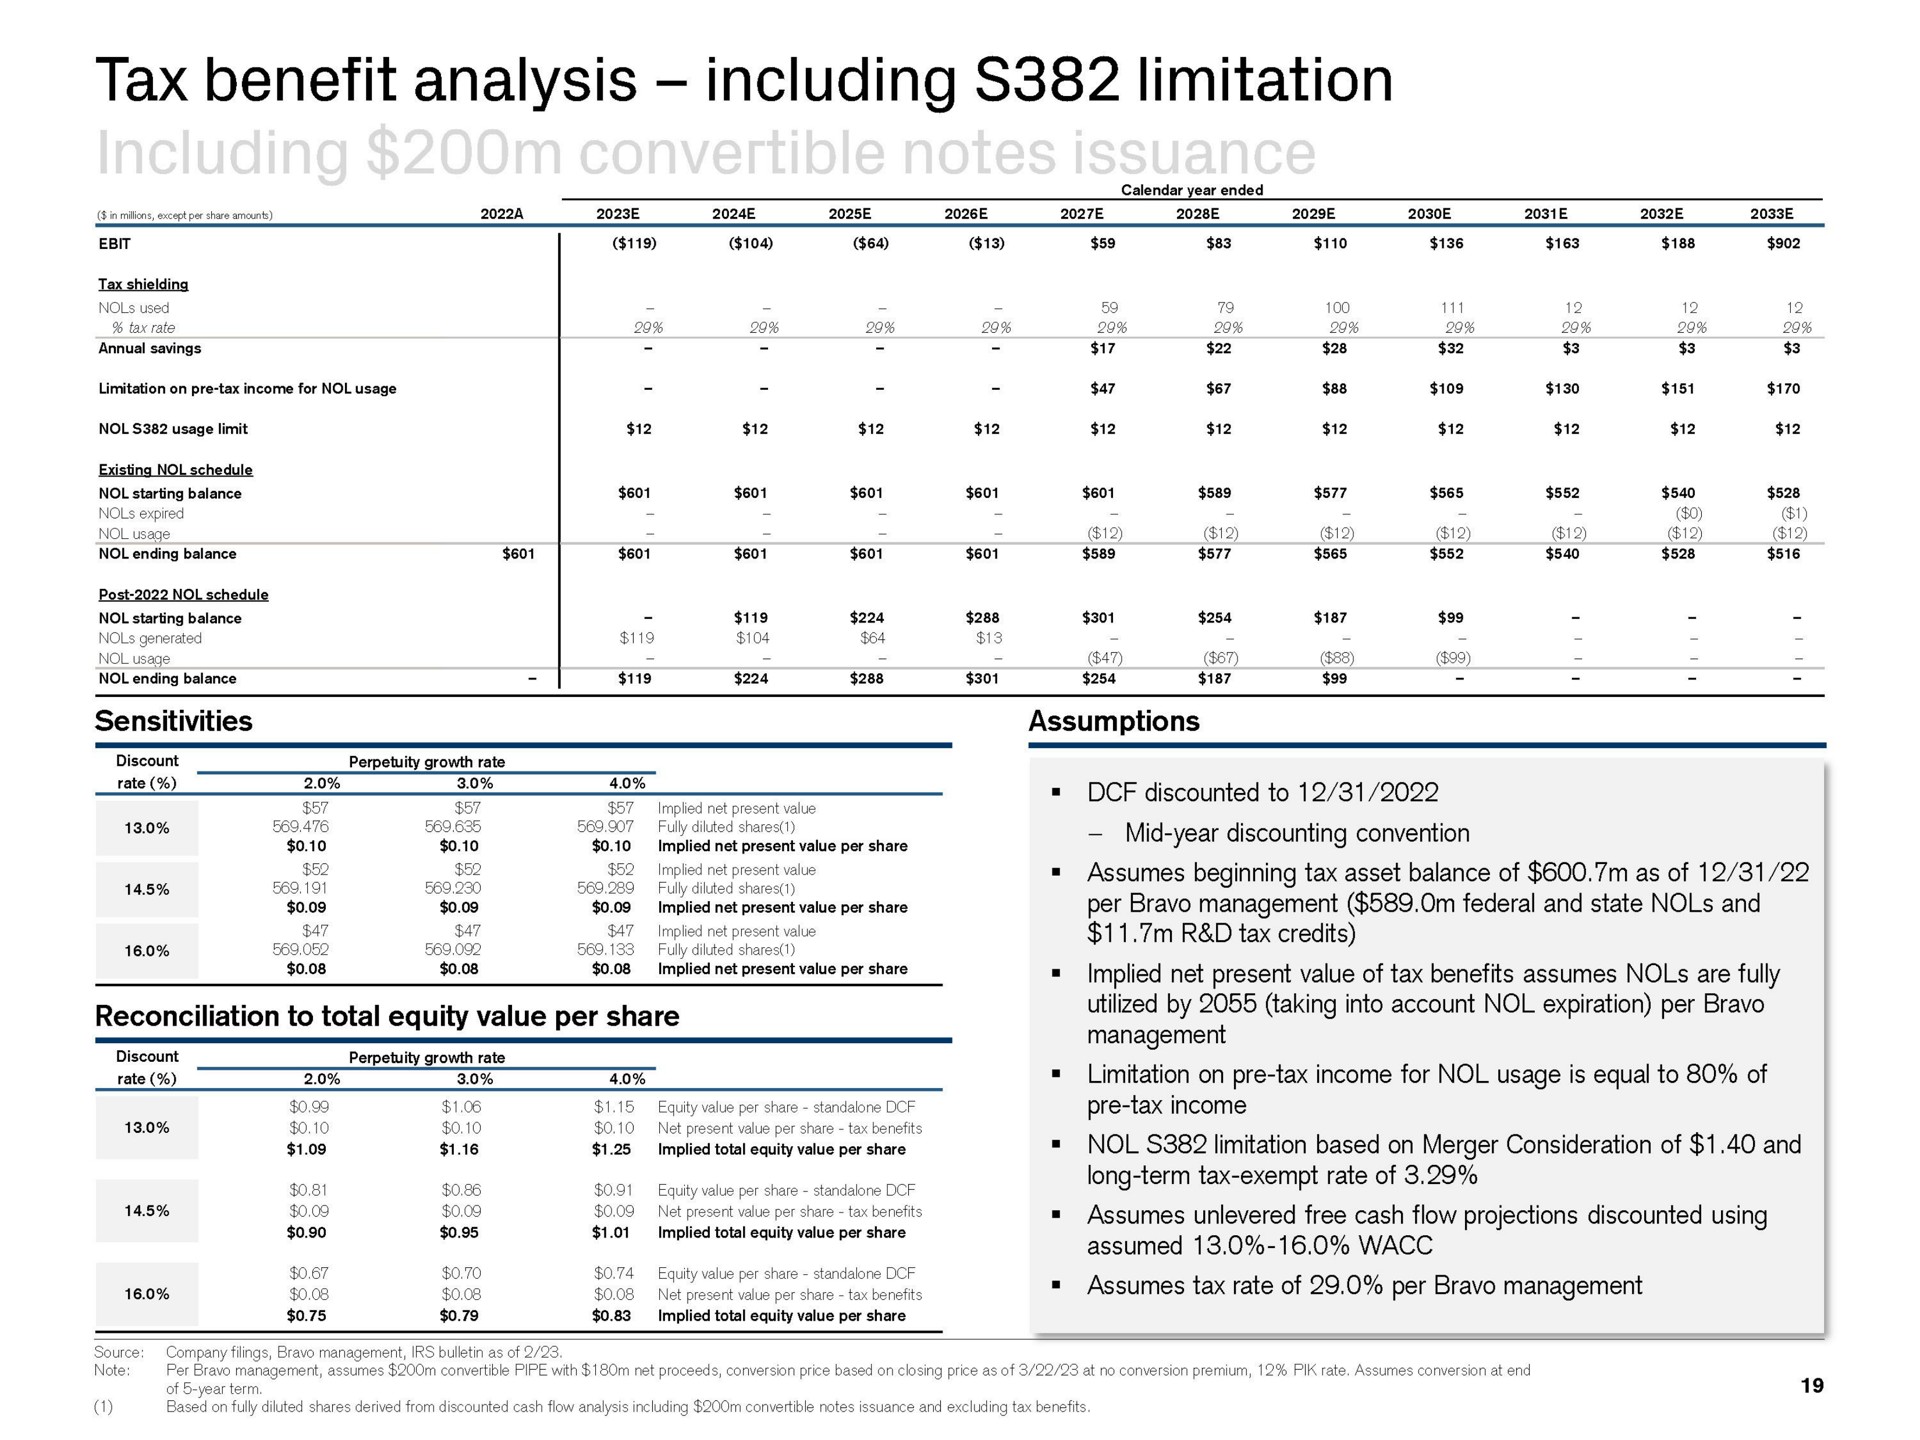 rate tax benefit analysis including limitation a reconciliation to total equity value per share discounted to implied net present value of tax benefits assumes are fully taking | Credit Suisse